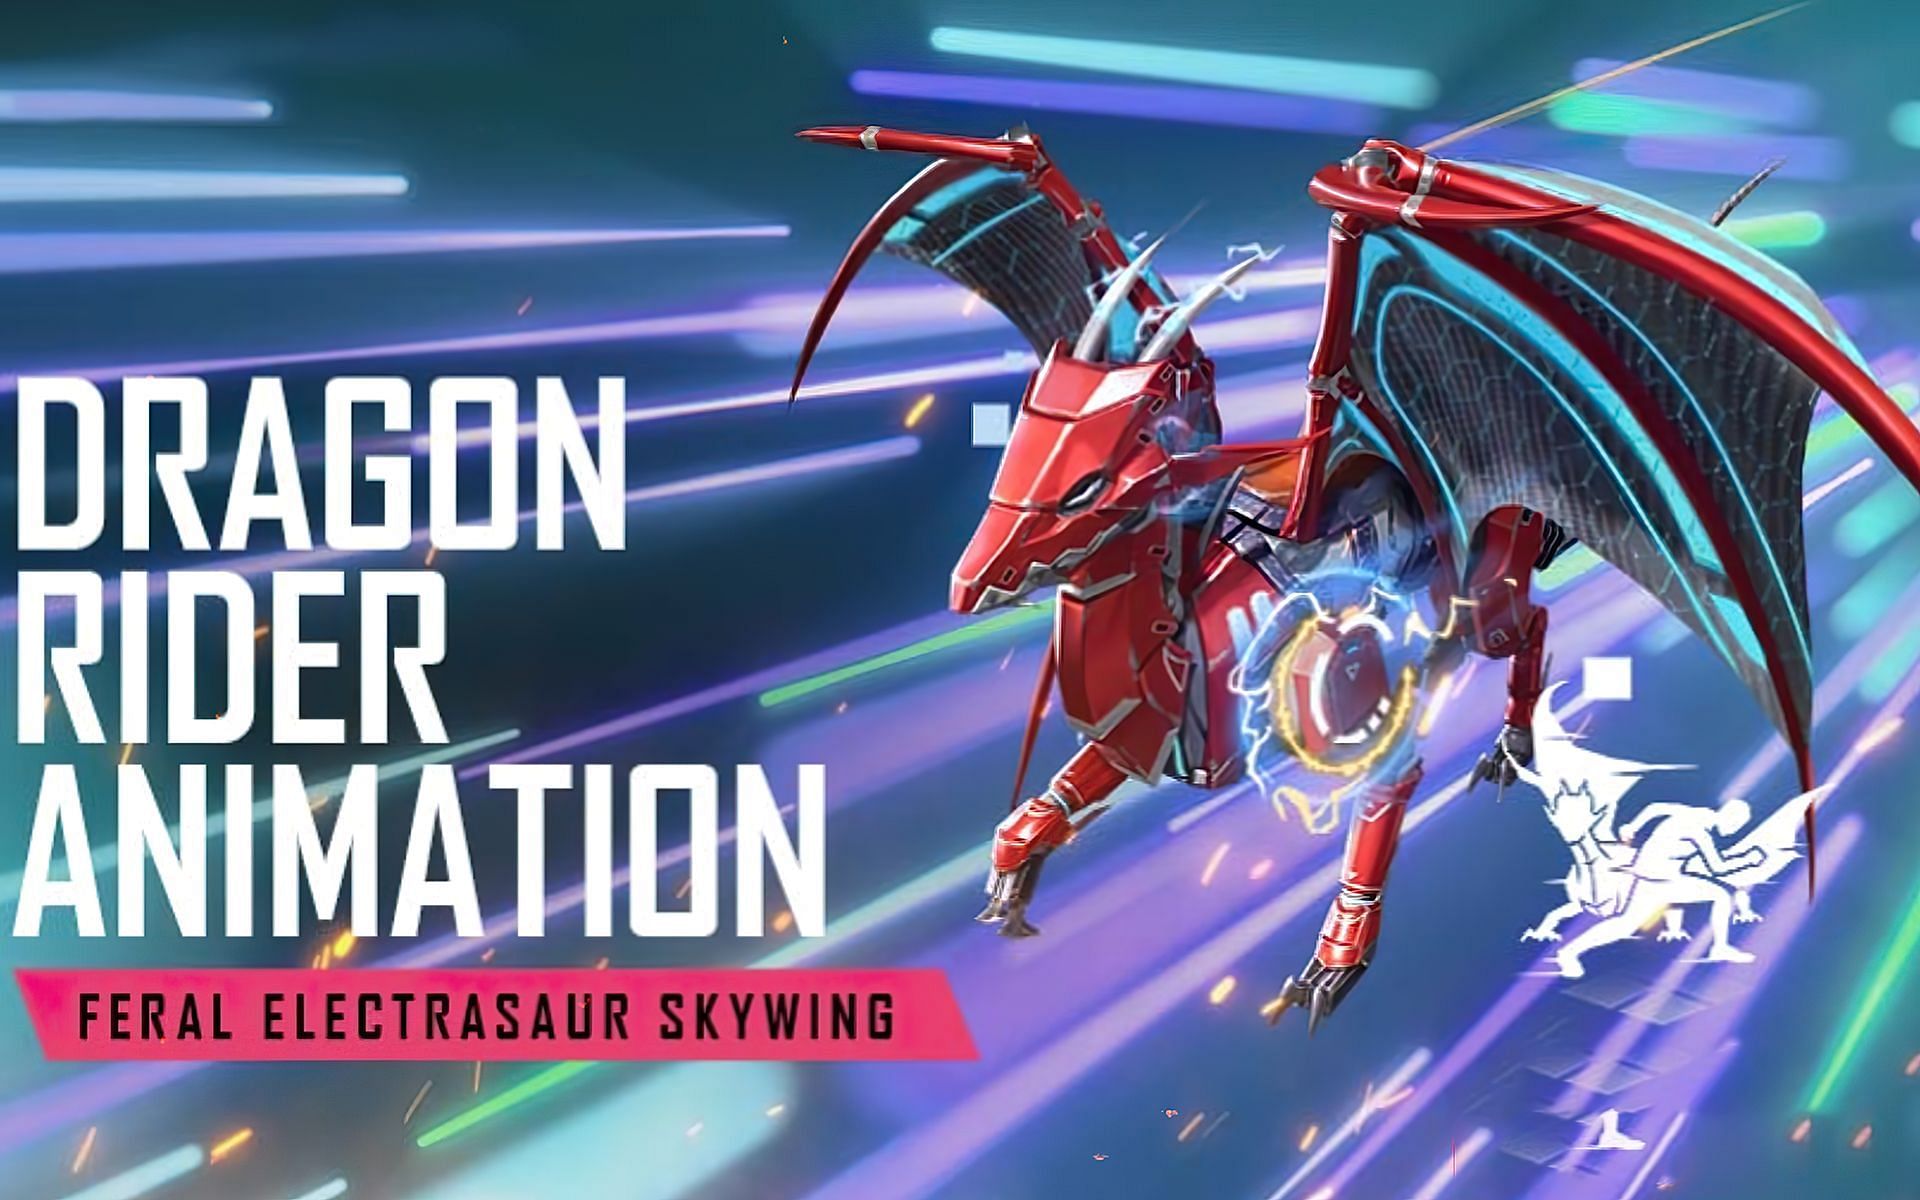 Garena Free Fire - New items added to Faded Wheel! Get the Celestial Flight  Arrival Animation and Celestial Skywing today! Arrive in style with these  shiney new items. Available till 29th Oct! #